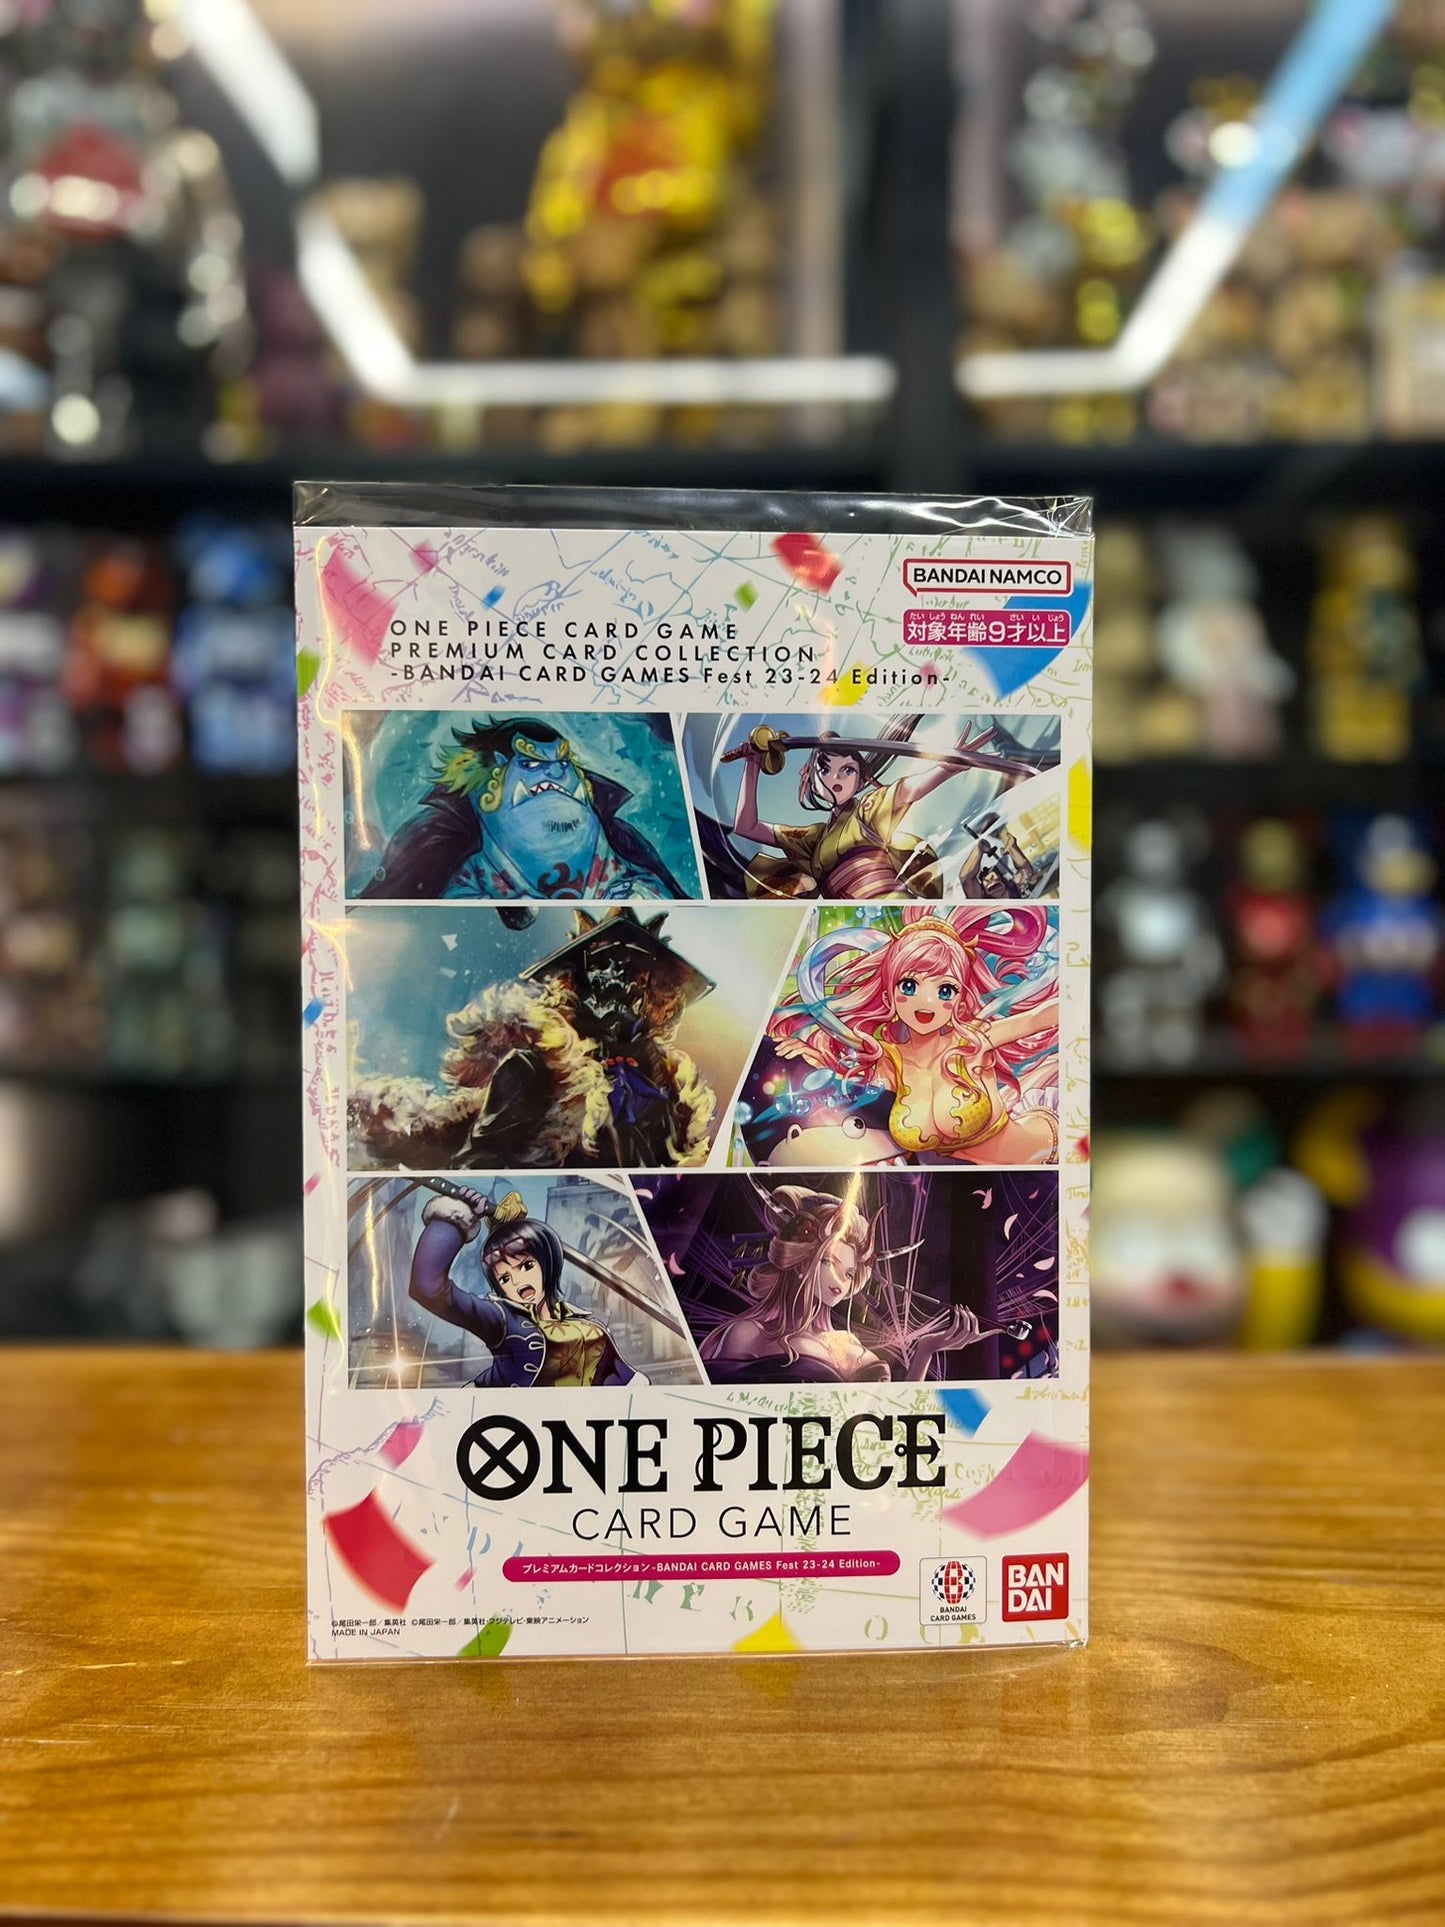 One Piece Card Game Premium Card Collection - Bandai Card Game Fest 23-24 Edition